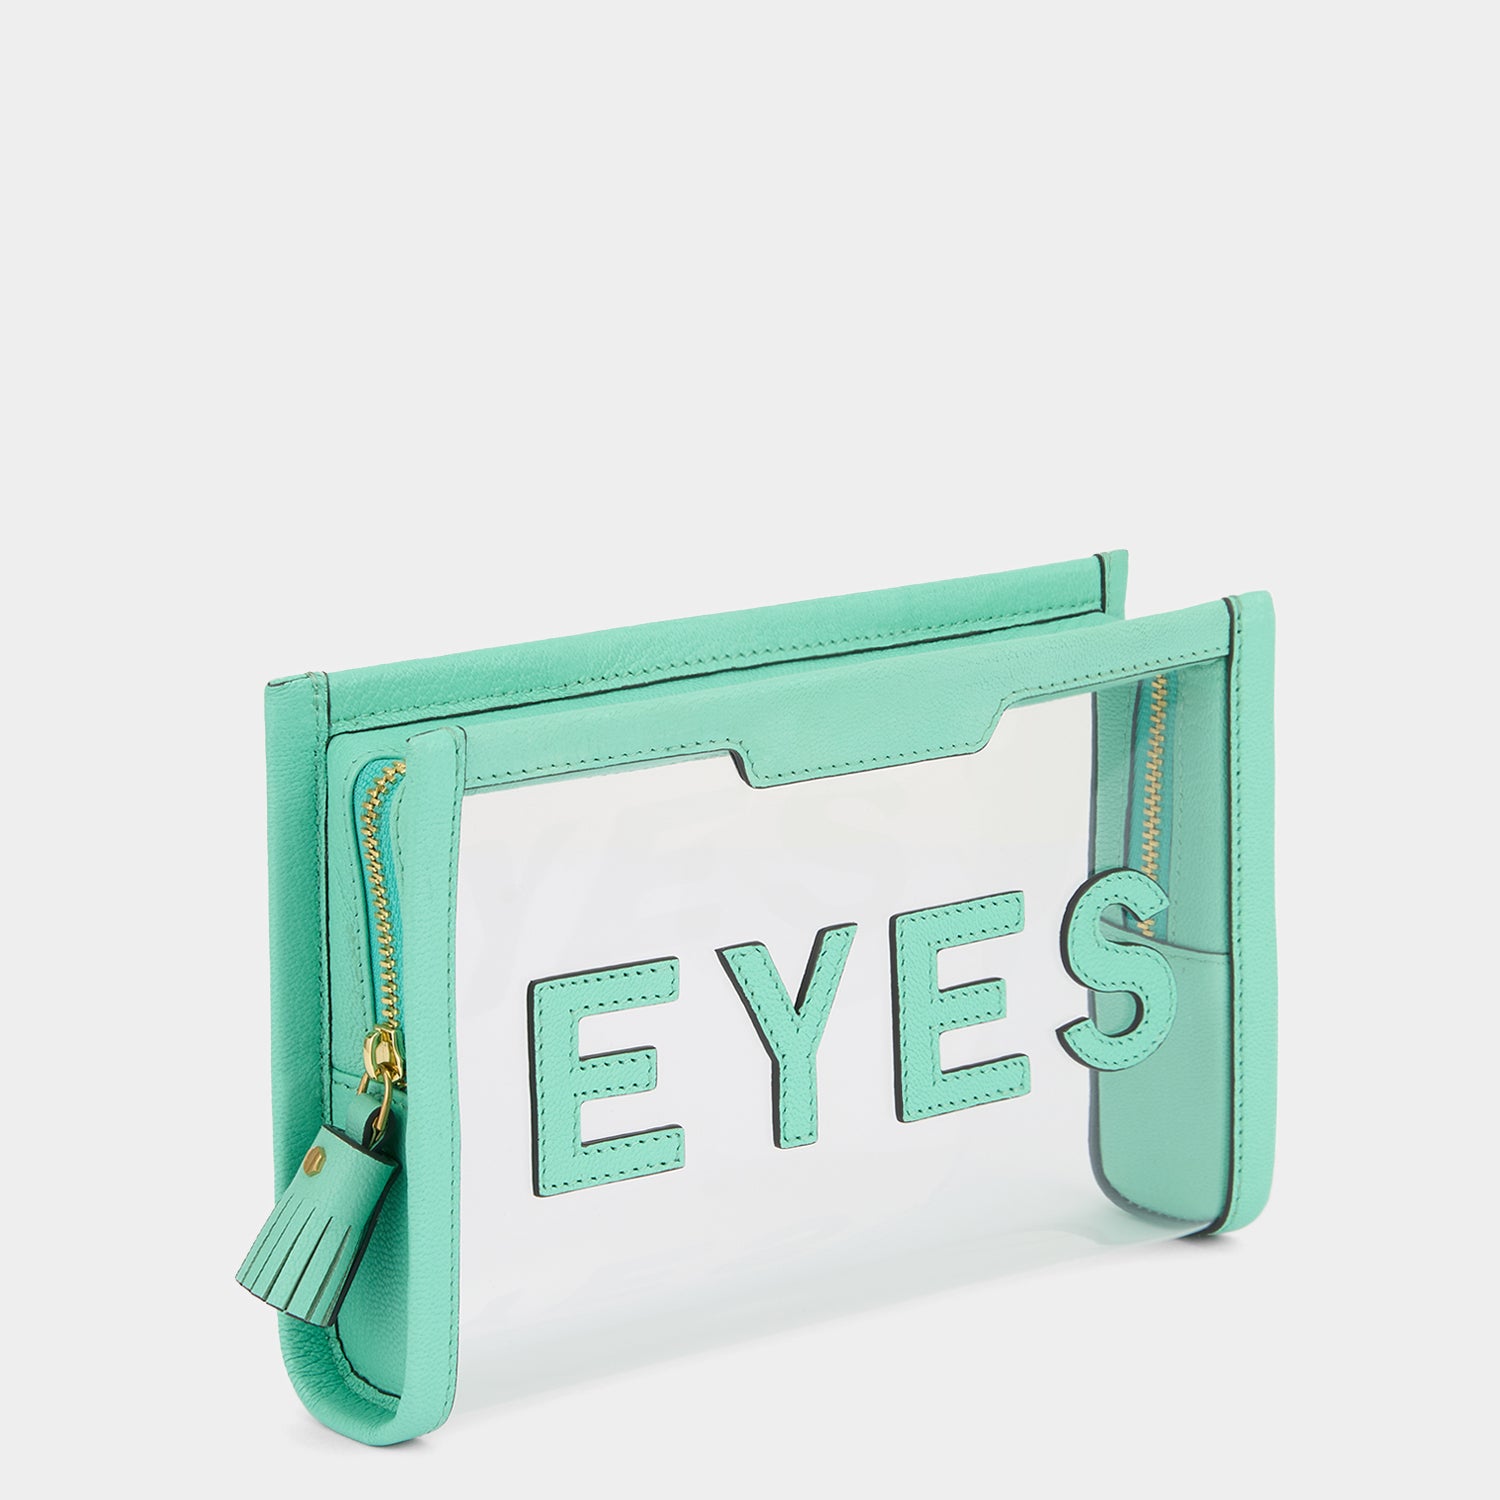 「EYES」ポーチ -

                  
                    Clear with Capra Leather in Arsenic -
                  

                  Anya Hindmarch JP
